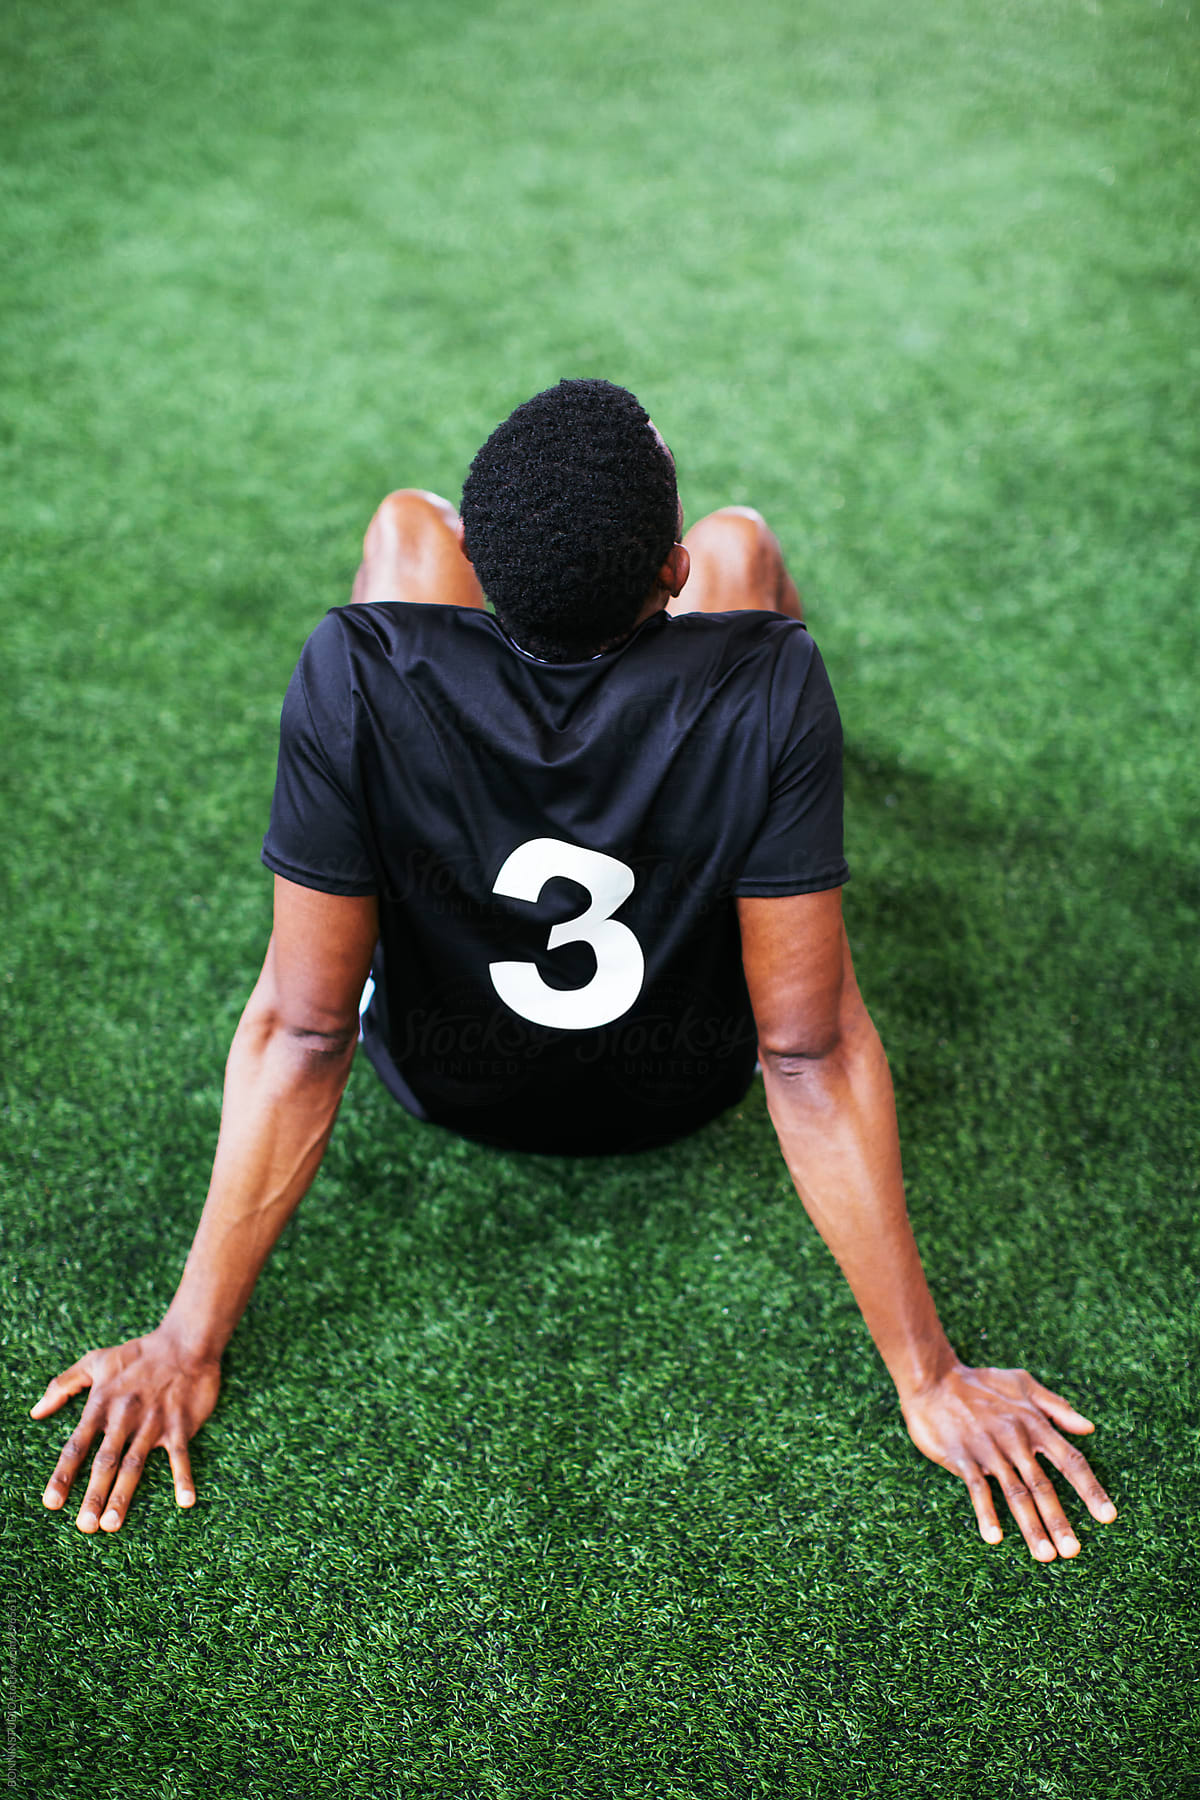 Back view of soccer player resting on football field.